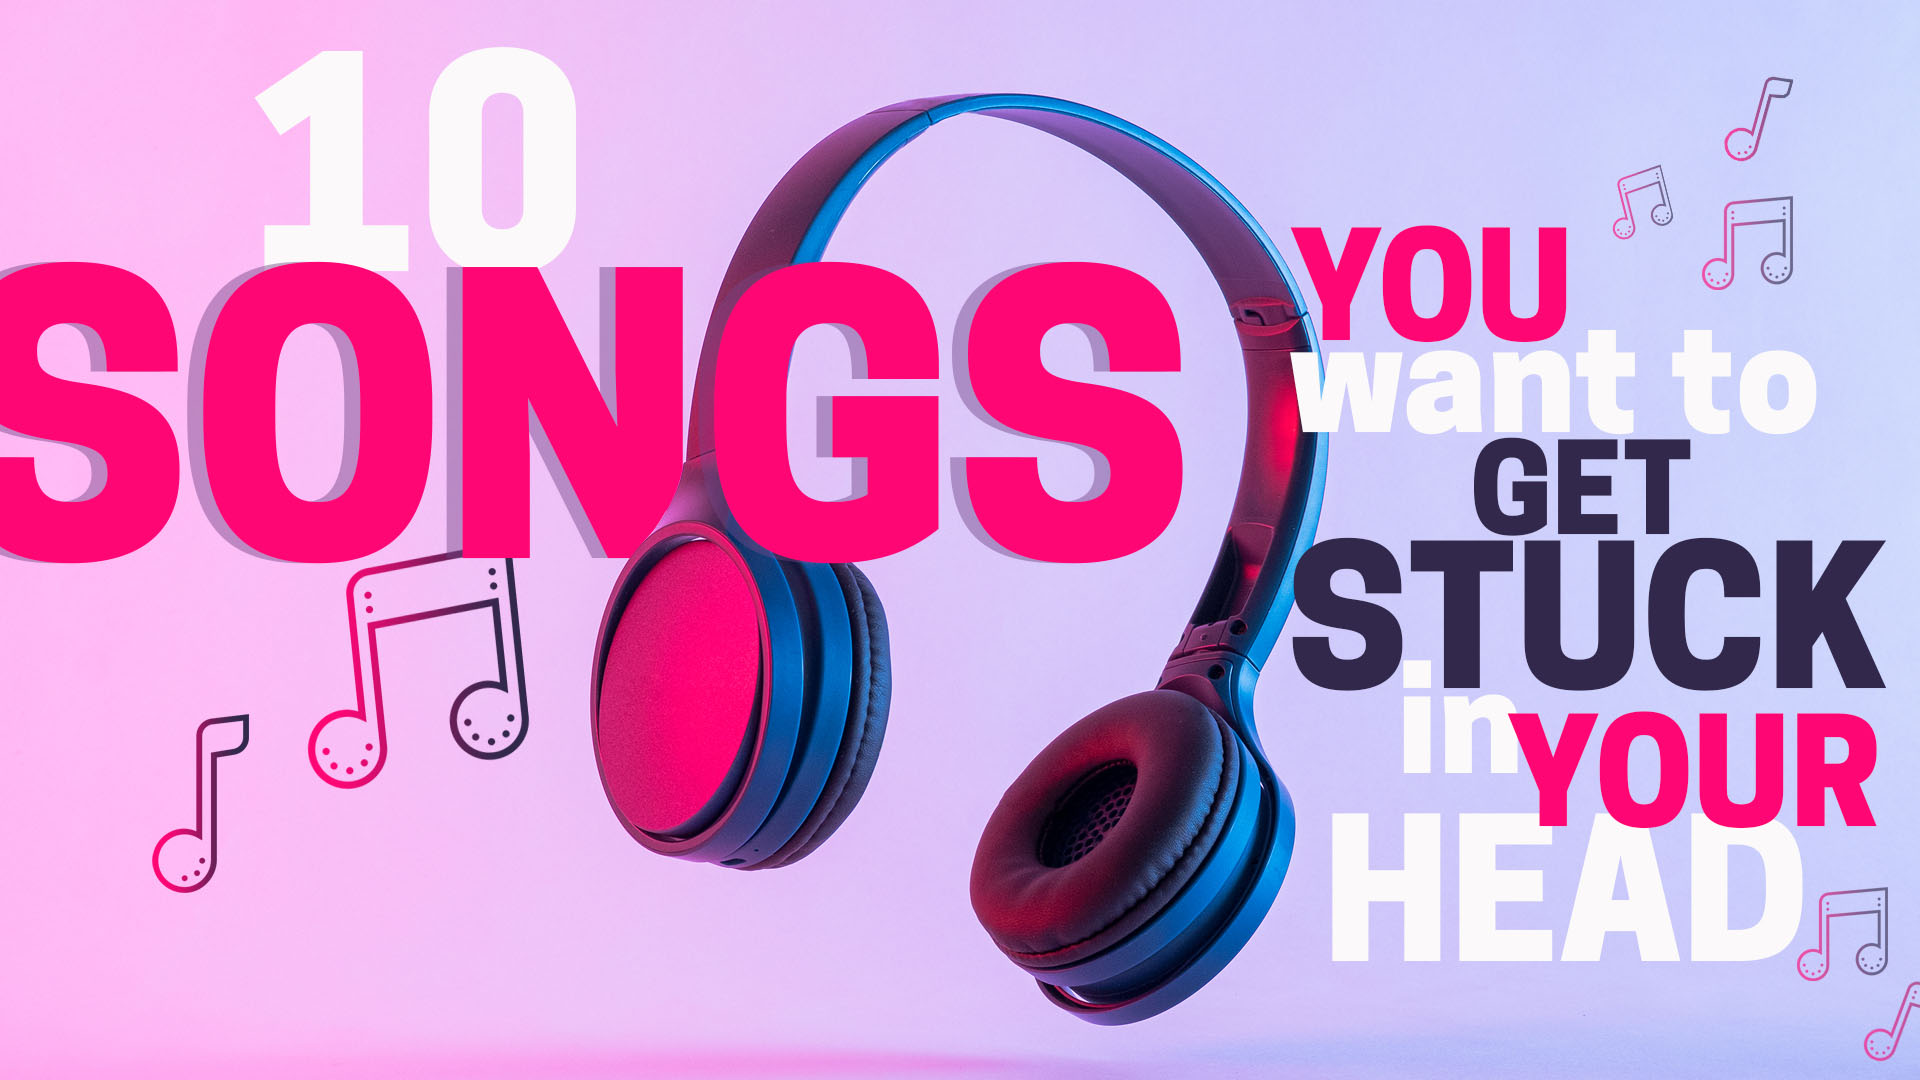 10 songs you want to get stuck in your head